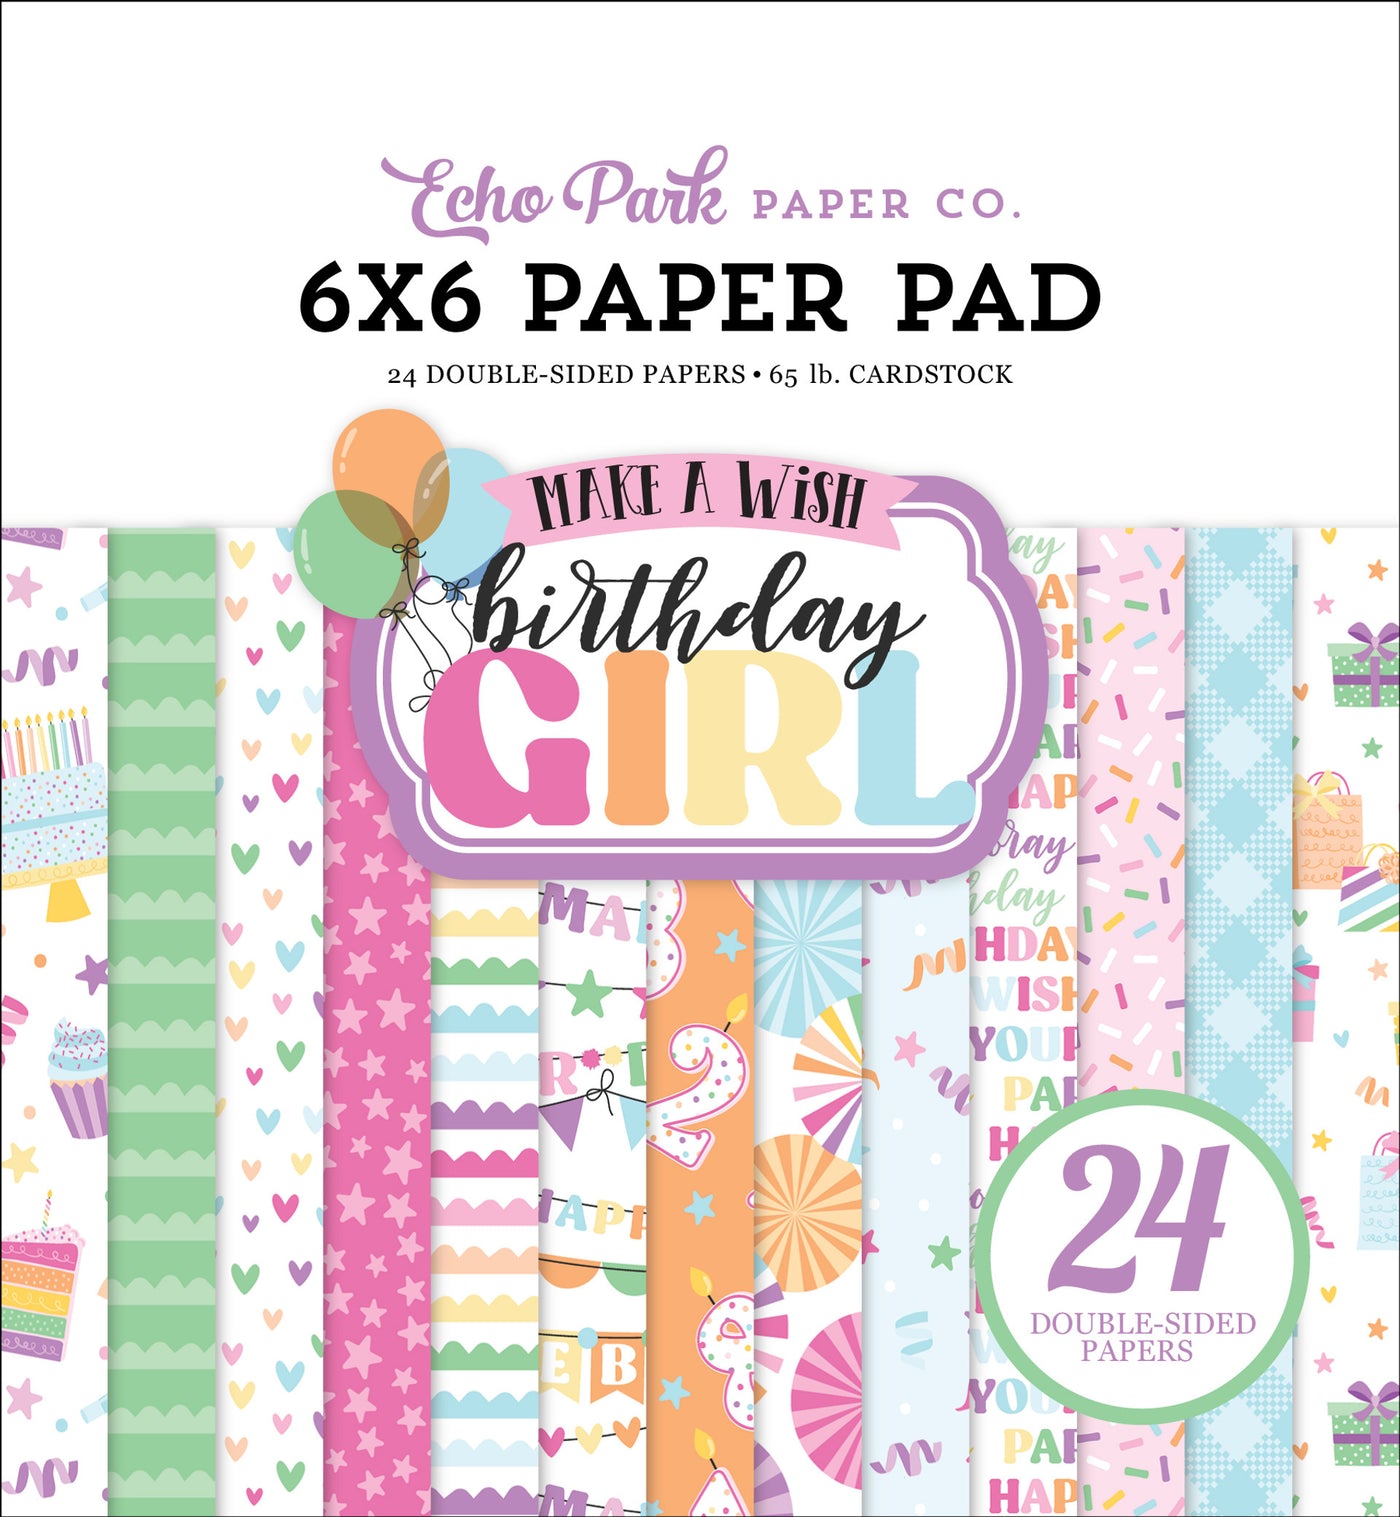 6x6 pad with 24 double-sided sheets. Scaled-down images are great for card making and similar crafts. This pad features pastel colored birthday theme.